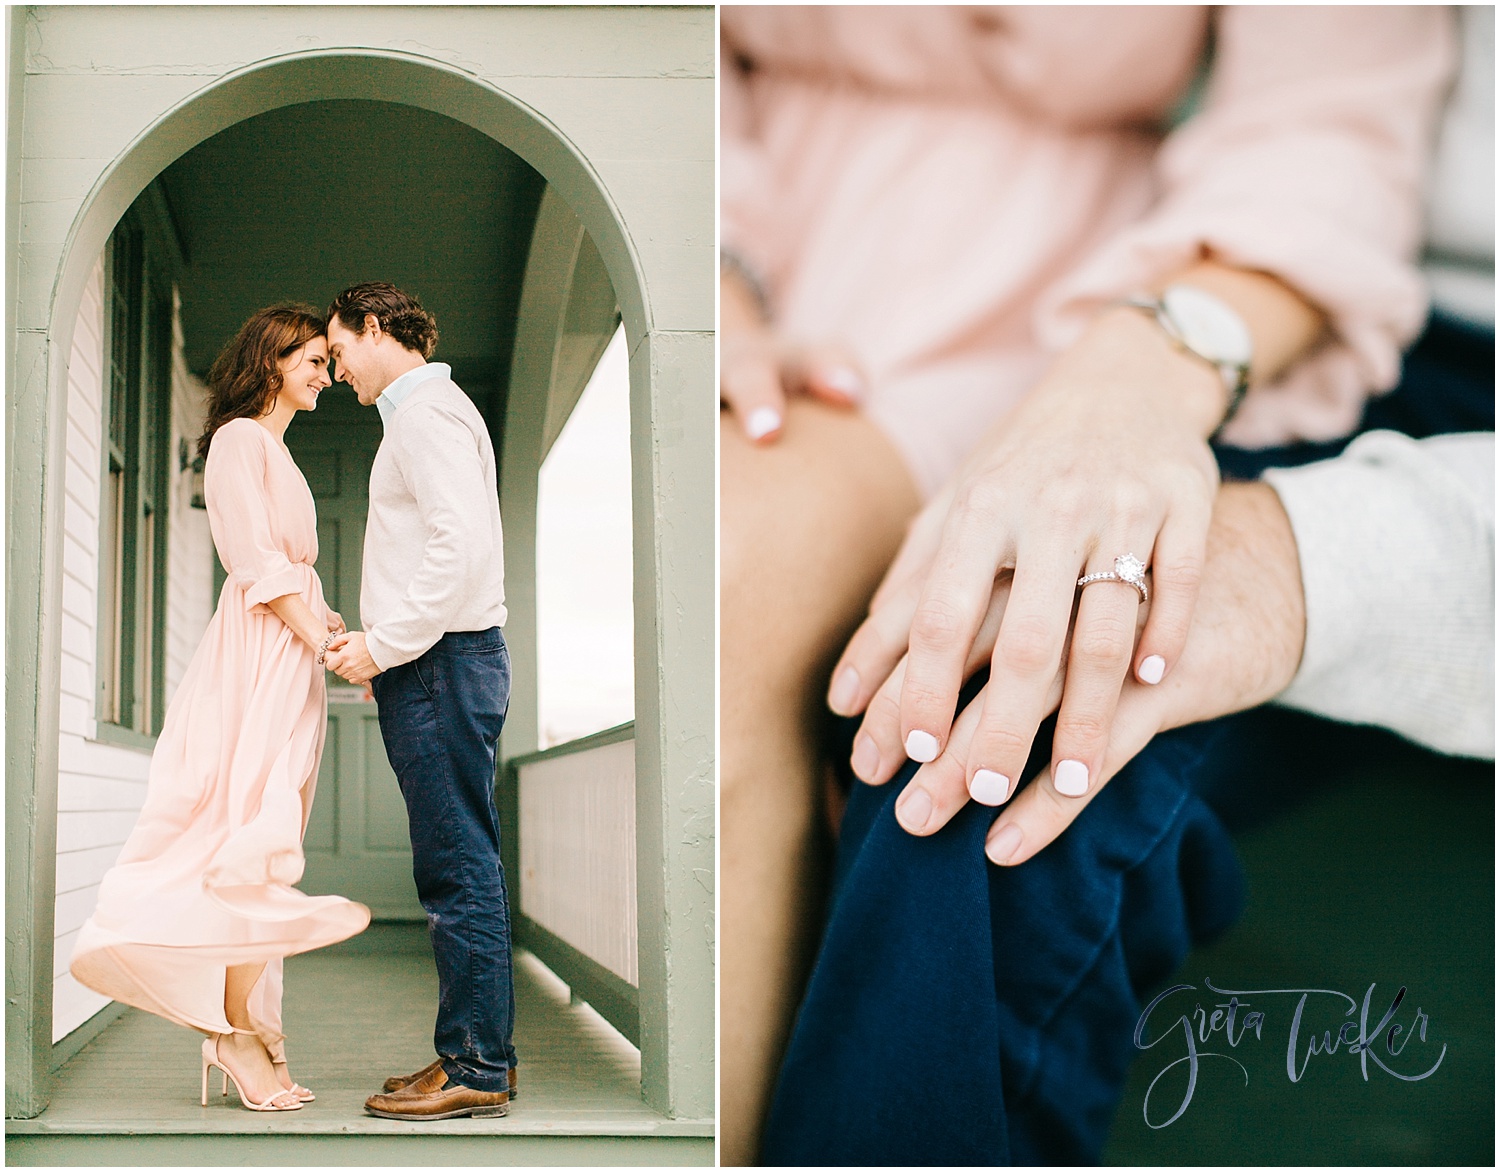 how to plan a proposal, portland maine proposal photographer, how to propose, perfect proposal